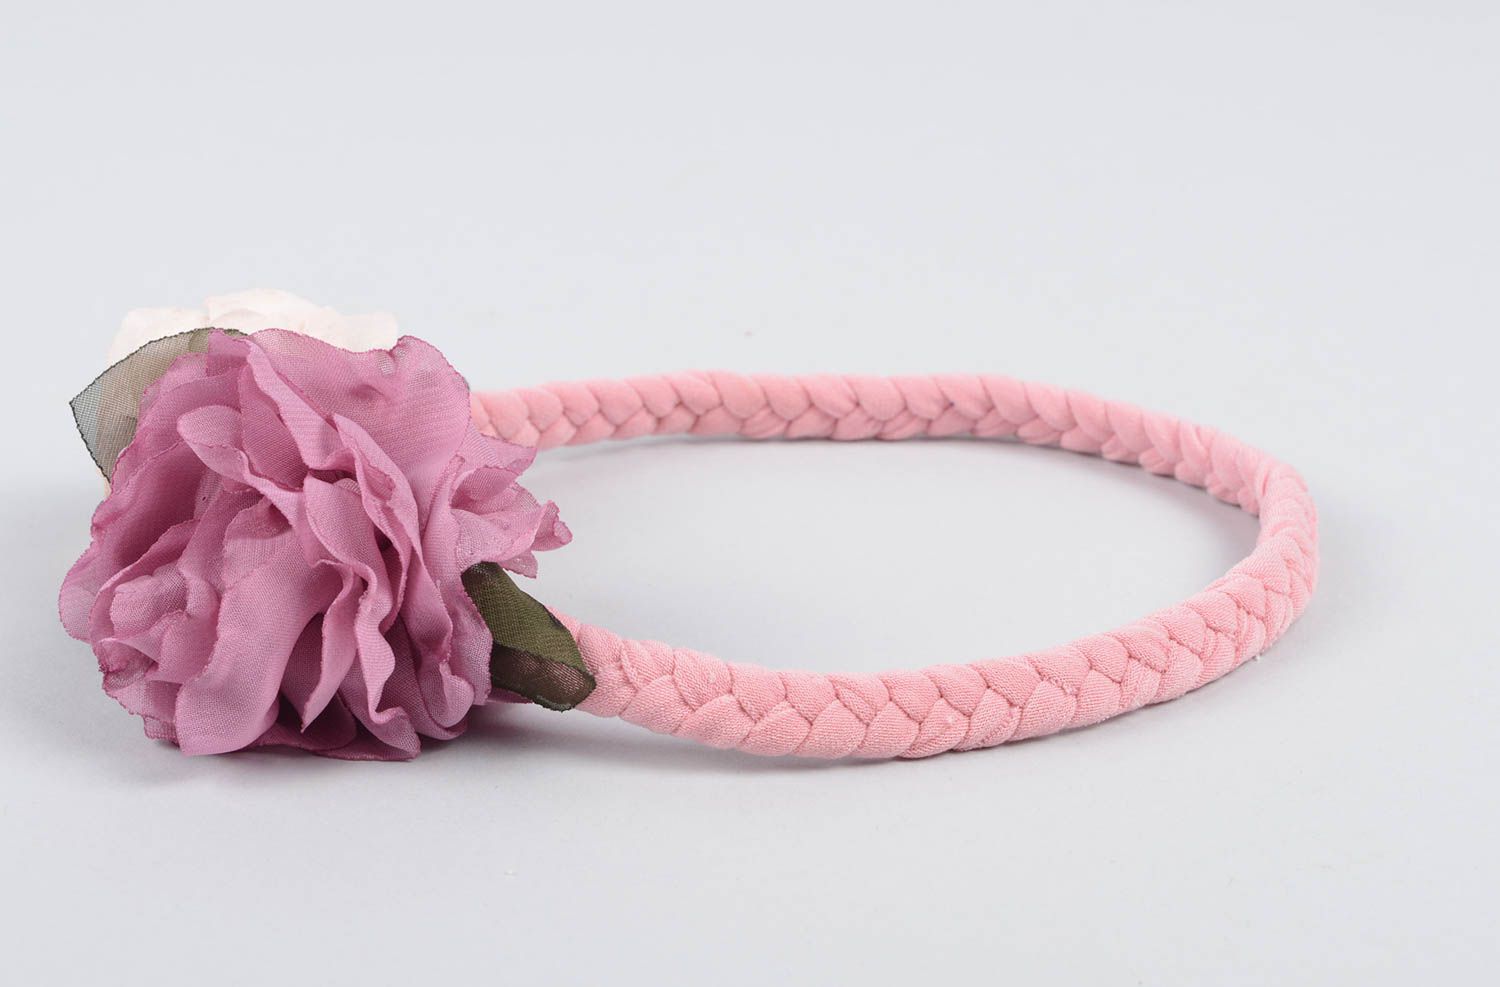 Stylish handmade flower headband gentle hair ornaments cool gifts for her photo 2